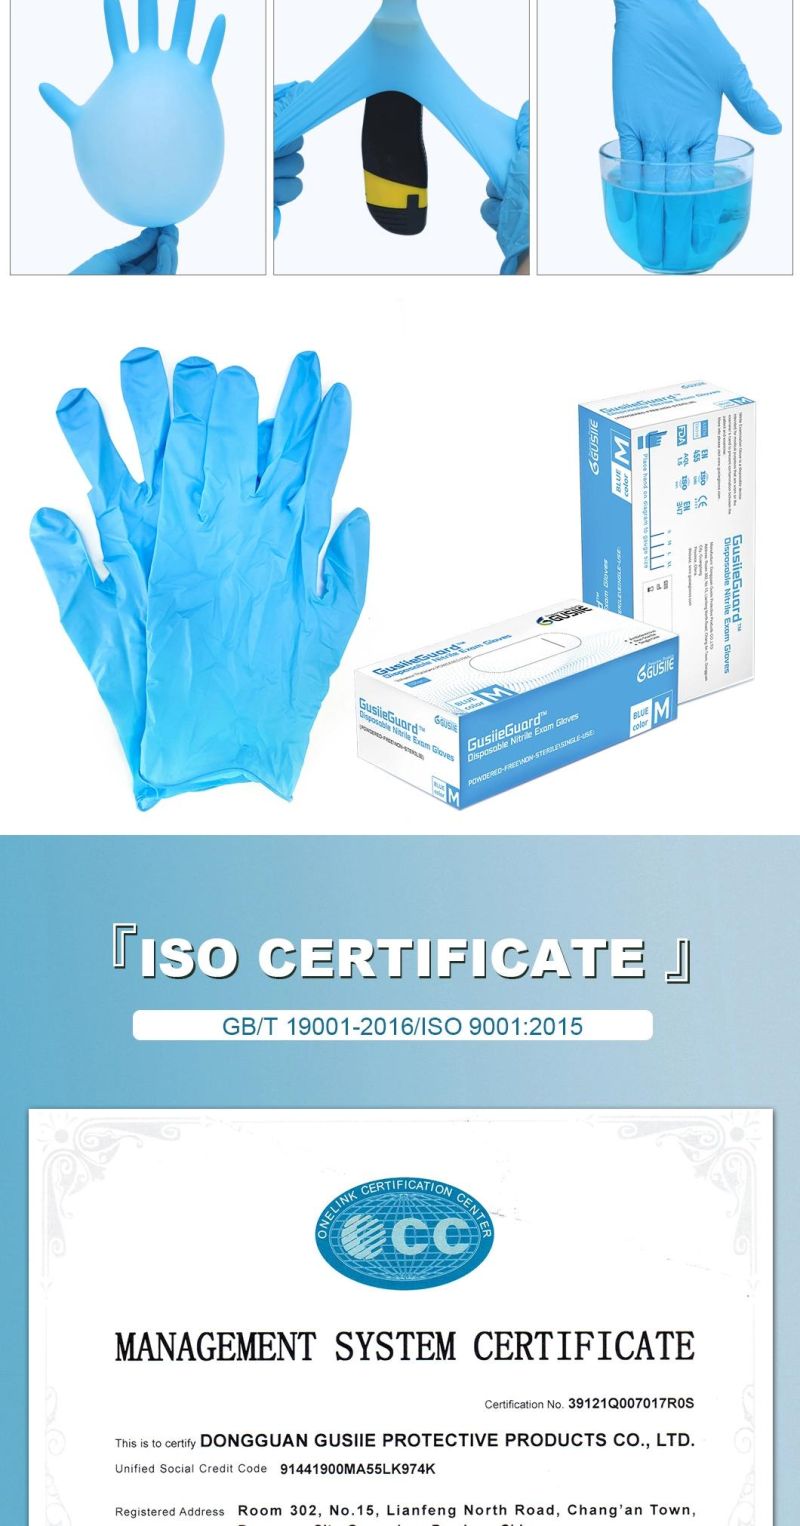 Gusiie Powder Free Disposable Medical Examination Nitrile Glove Disposable Work Protective Examination Powder Free Latex Nitrile Large Gloves